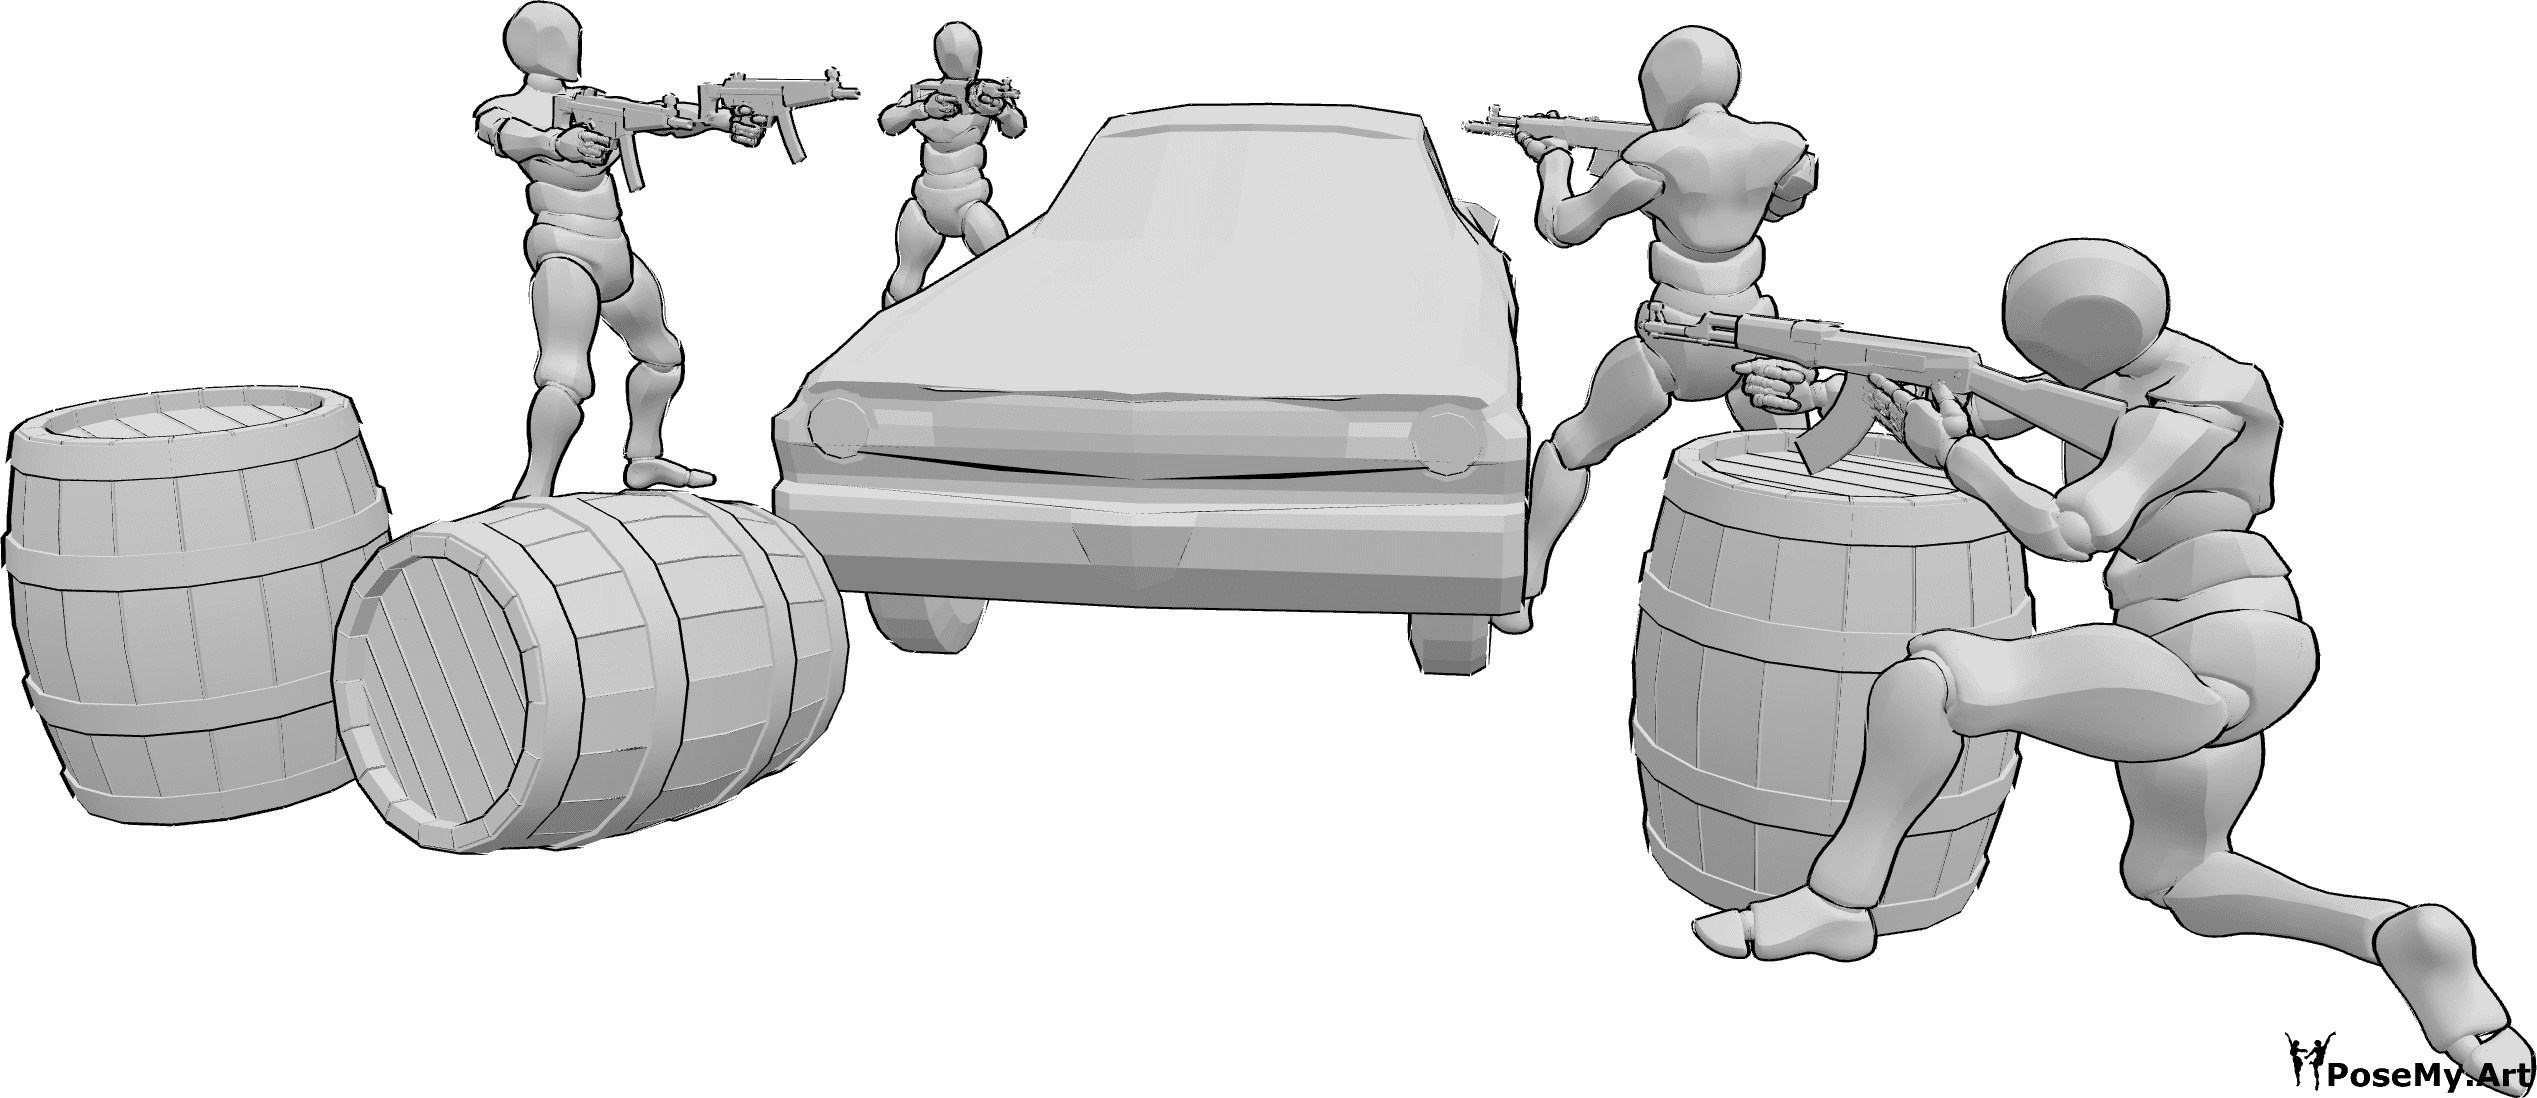 Pose Reference- Four males battle pose - Four males with guns in a battle, taking cover behind a car and barrels